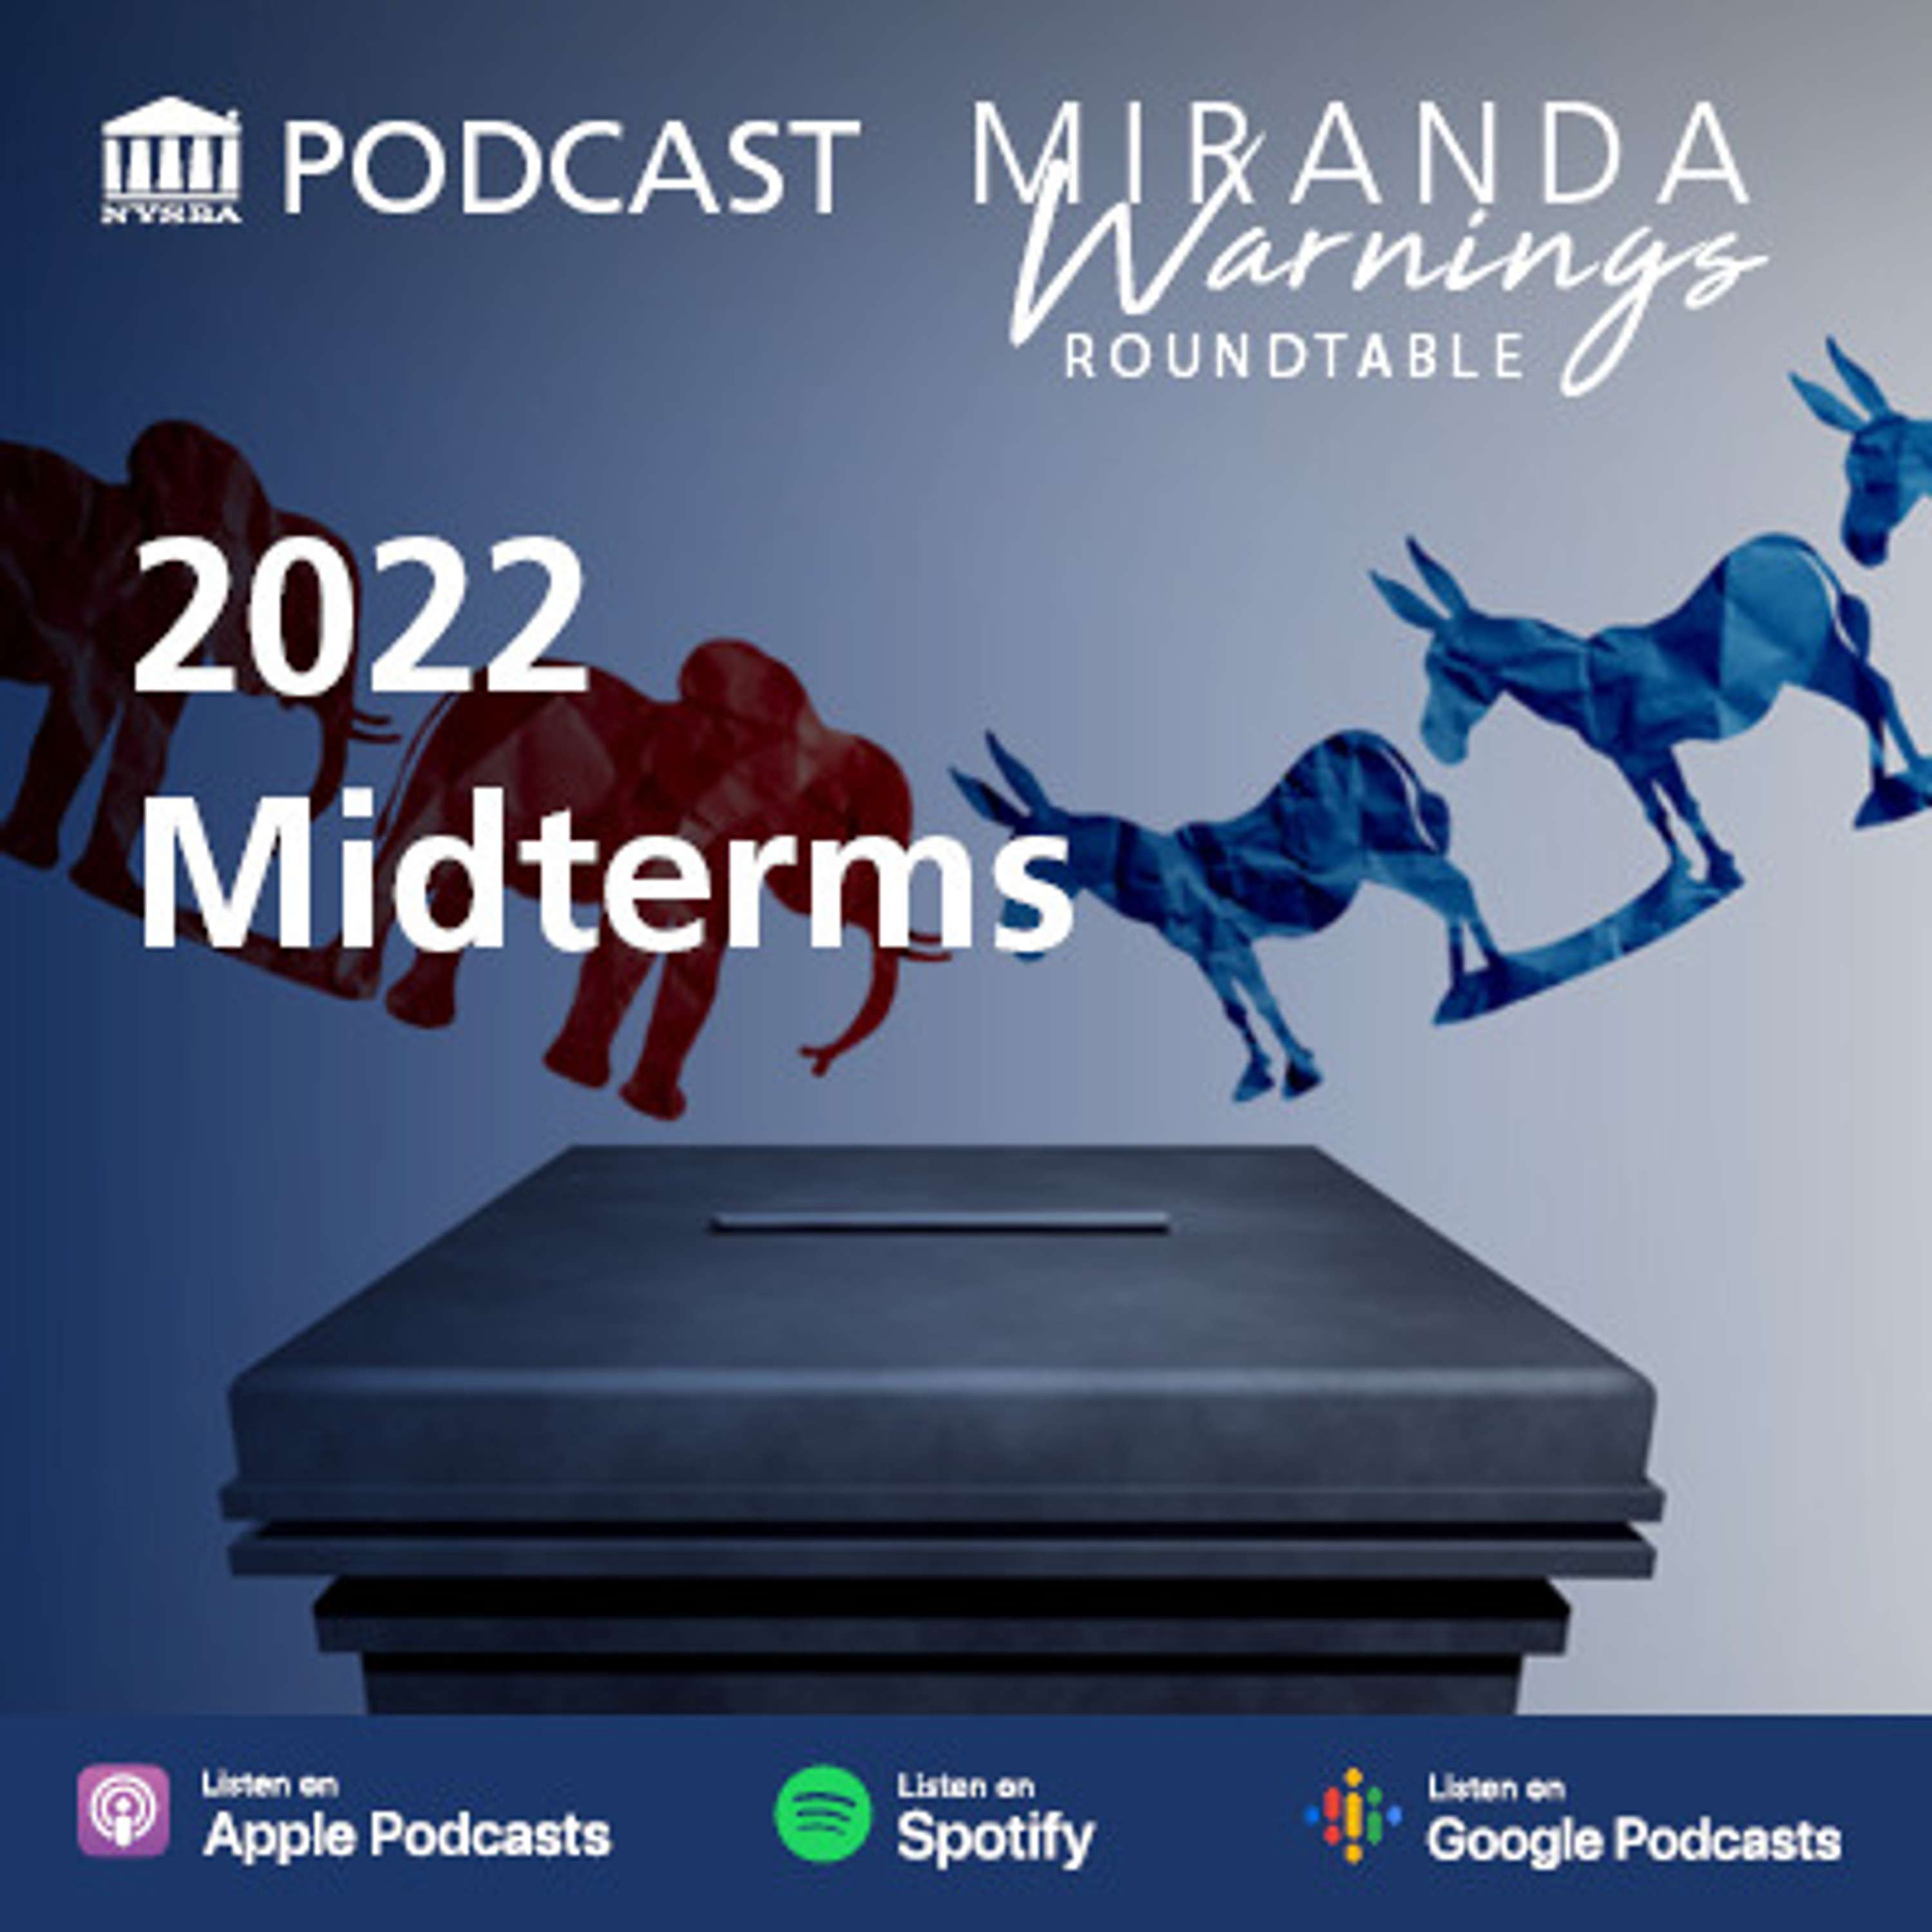 2022 Midterms: What's Next for the NYS Legislature & Congress?